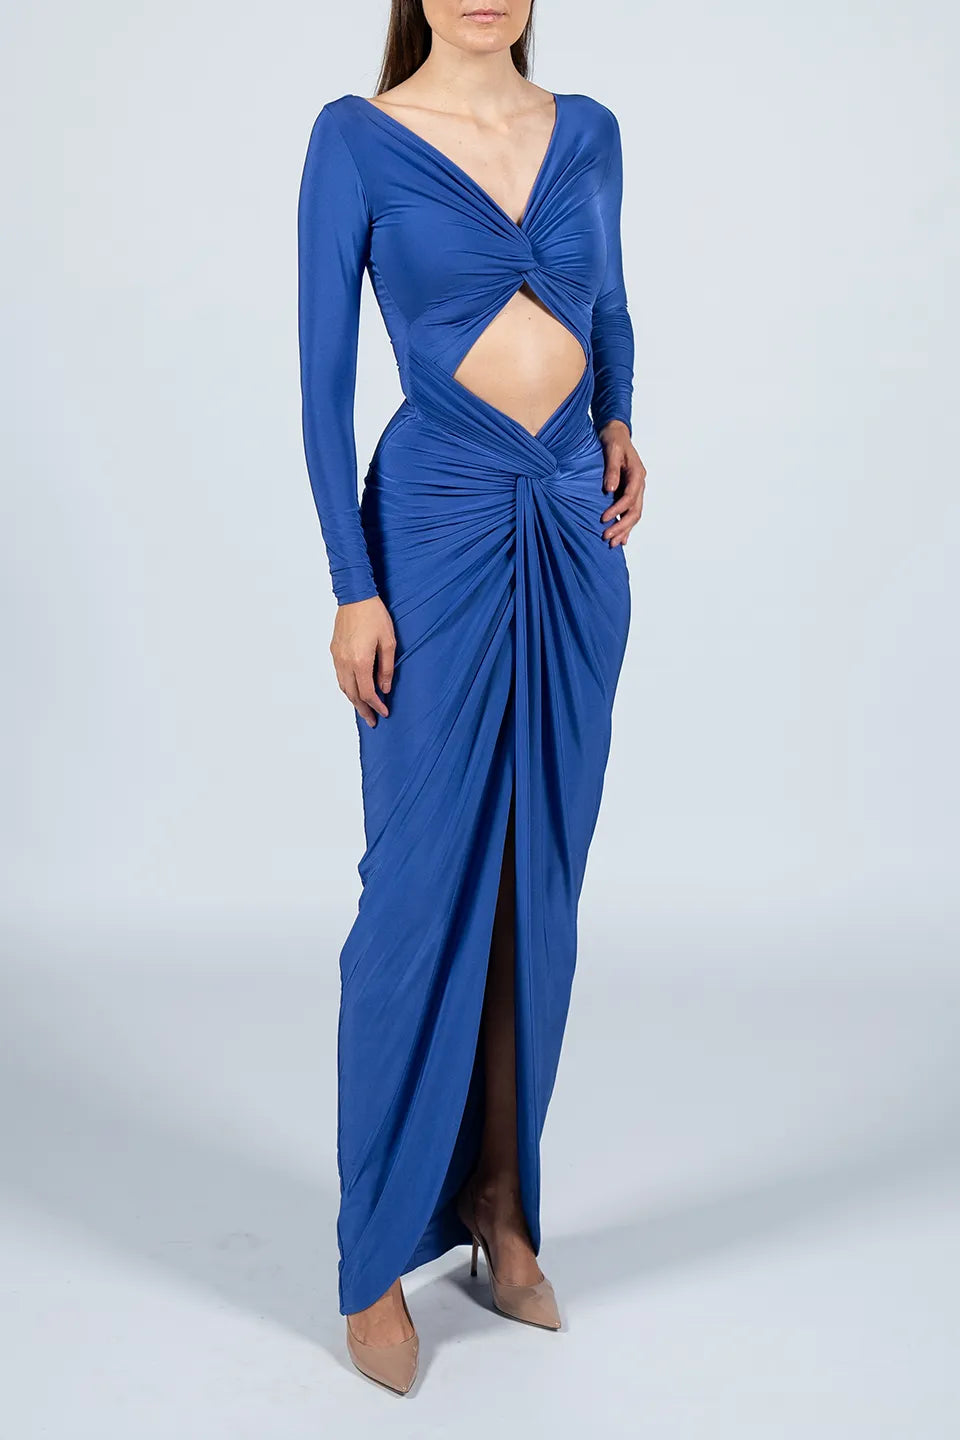 Designer Blue Maxi dresses, shop online with free delivery in UAE. Product gallery 2